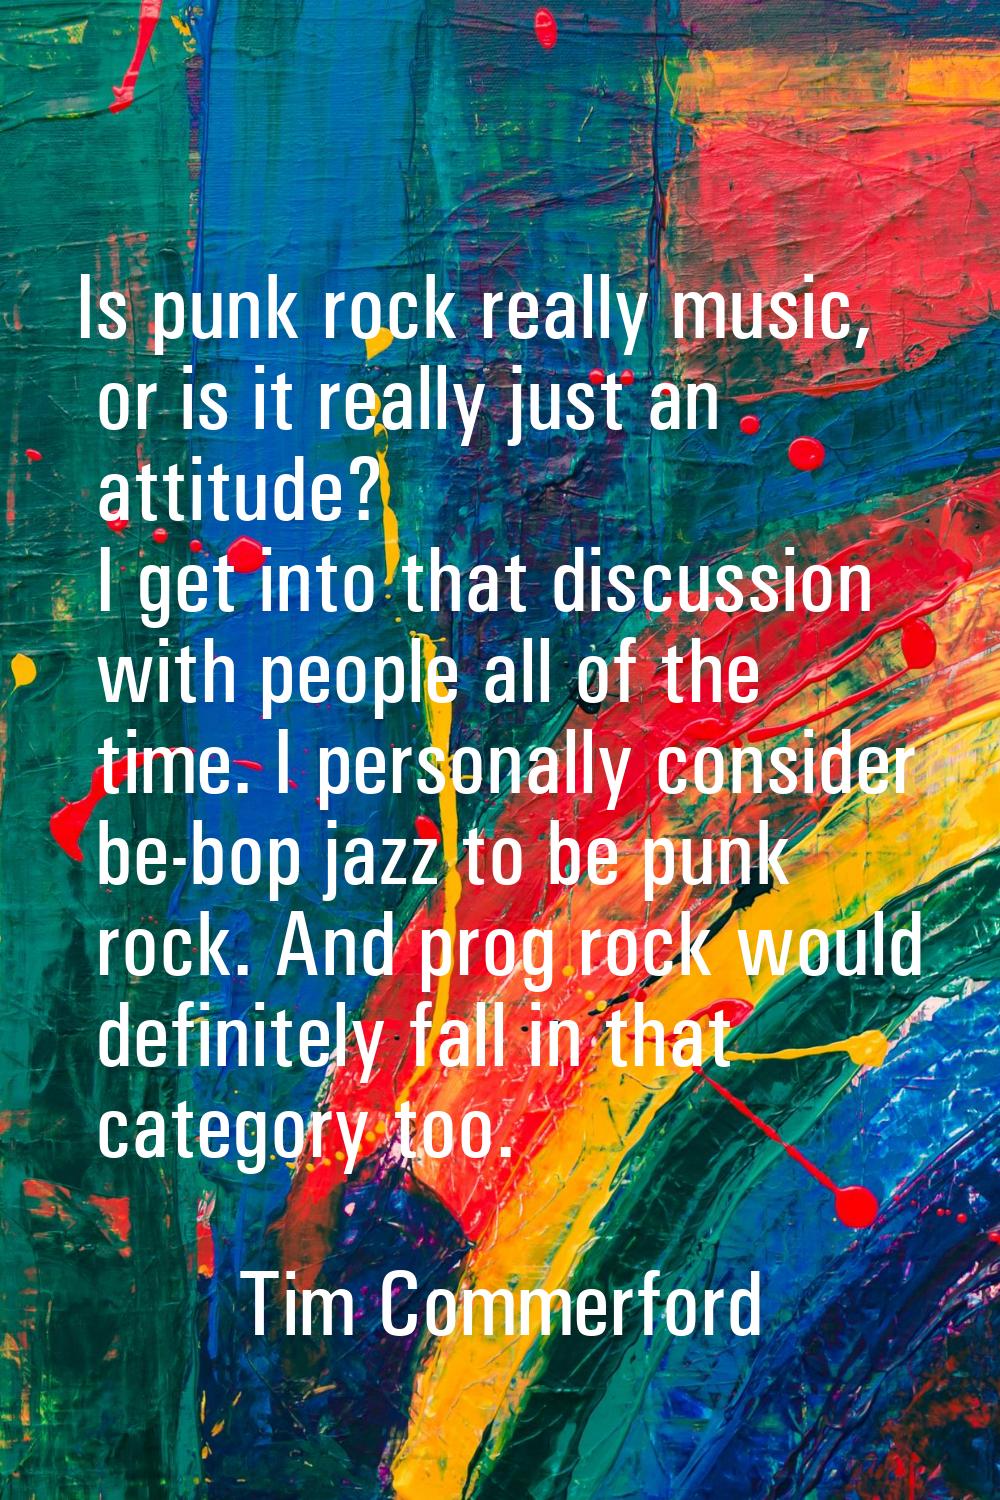 Is punk rock really music, or is it really just an attitude? I get into that discussion with people